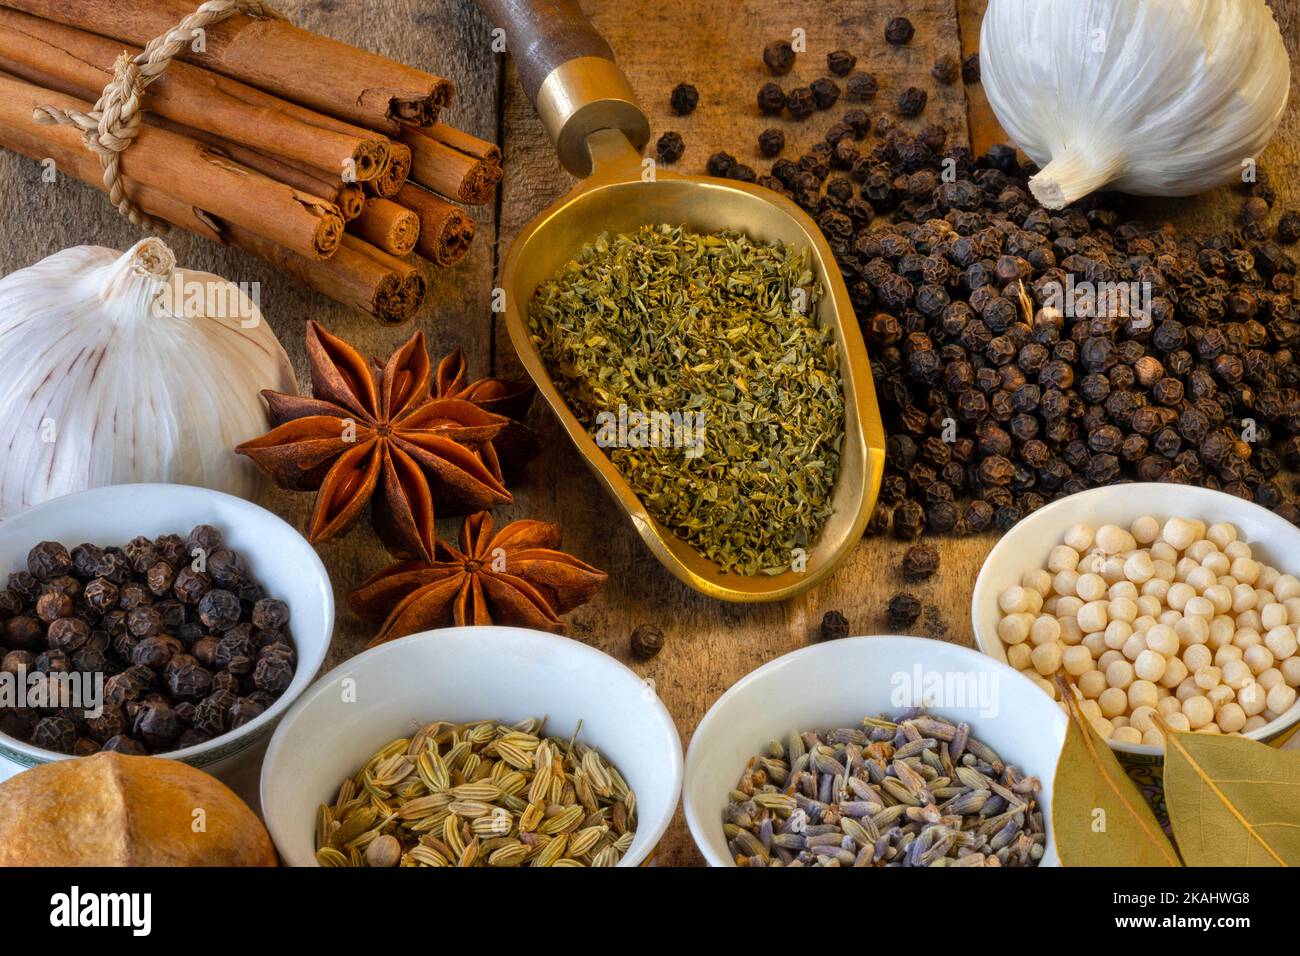 Cooking spices used to add flavor and seasoning when cooking. Stock Photo